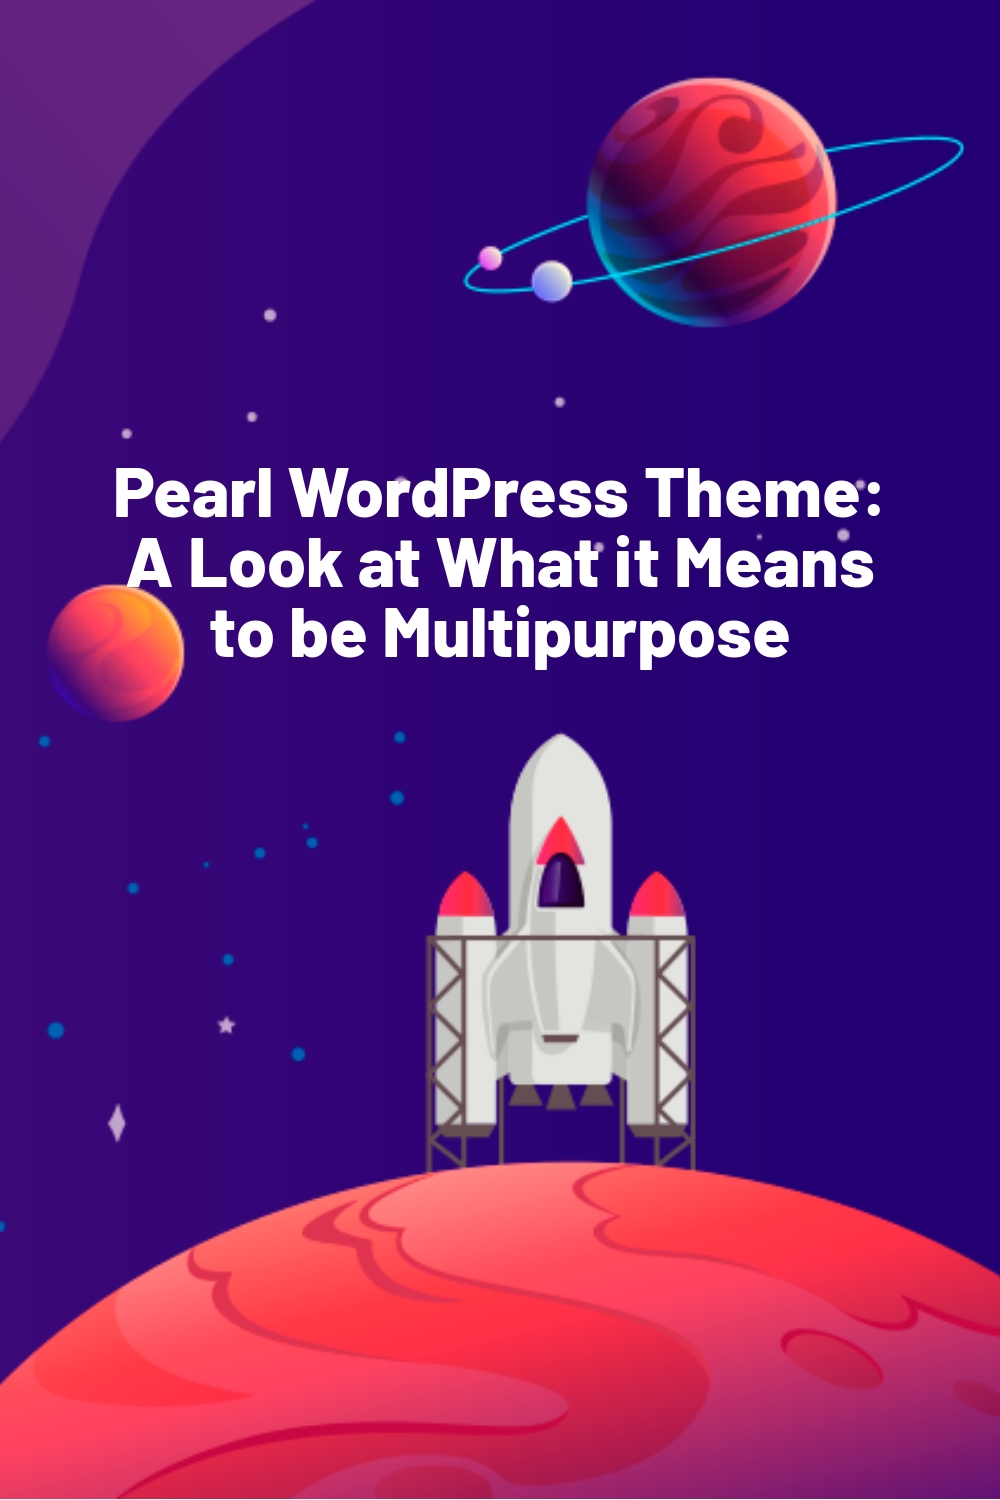 Pearl WordPress Theme: A Look at What it Means to be Multipurpose